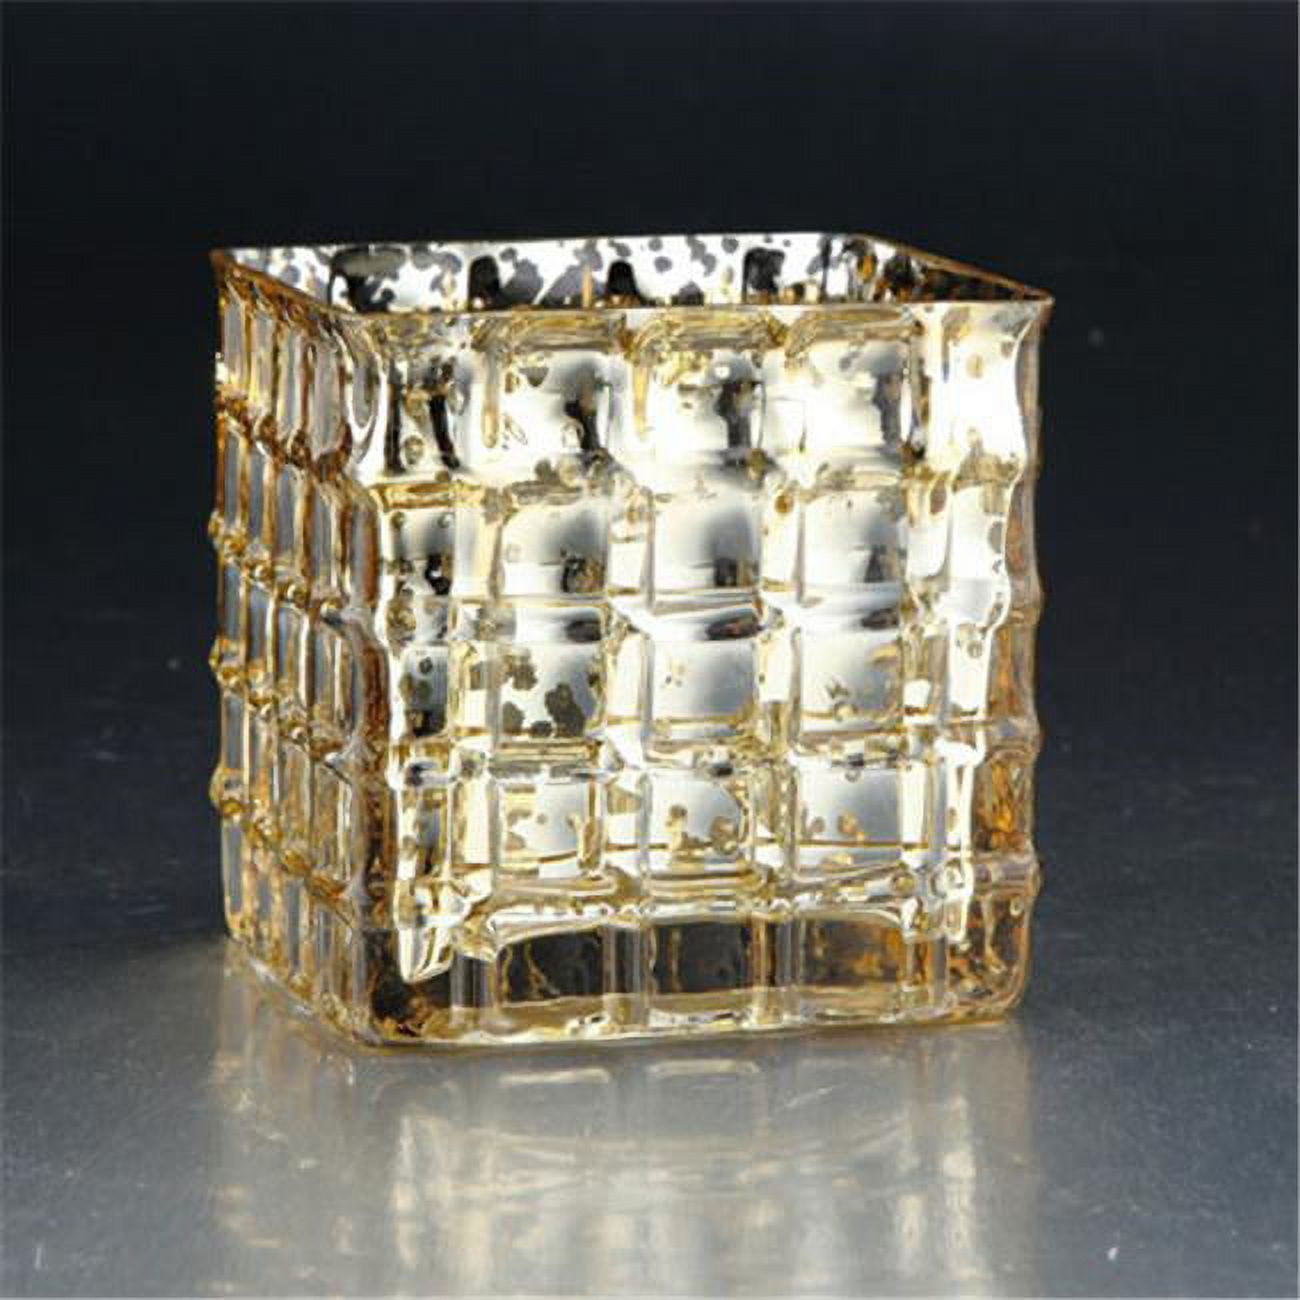 57059 4.5 X 4.5 X 4.5 In. Square Glass Candle Holder, Gold